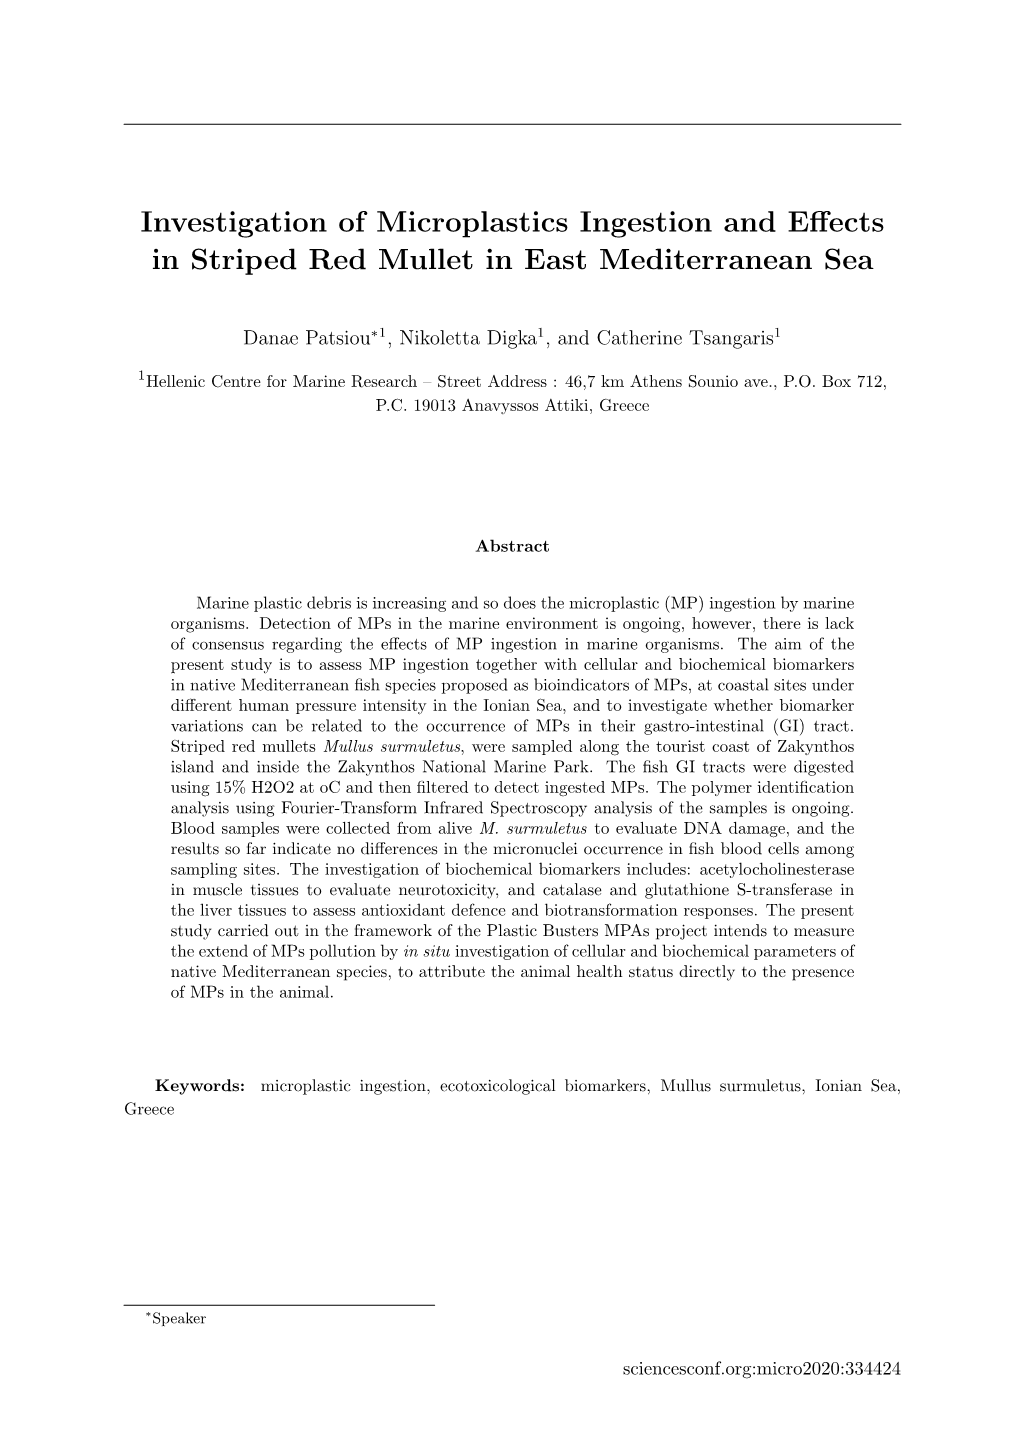 Investigation of Microplastics Ingestion and Effects in Striped Red Mullet in East Mediterranean